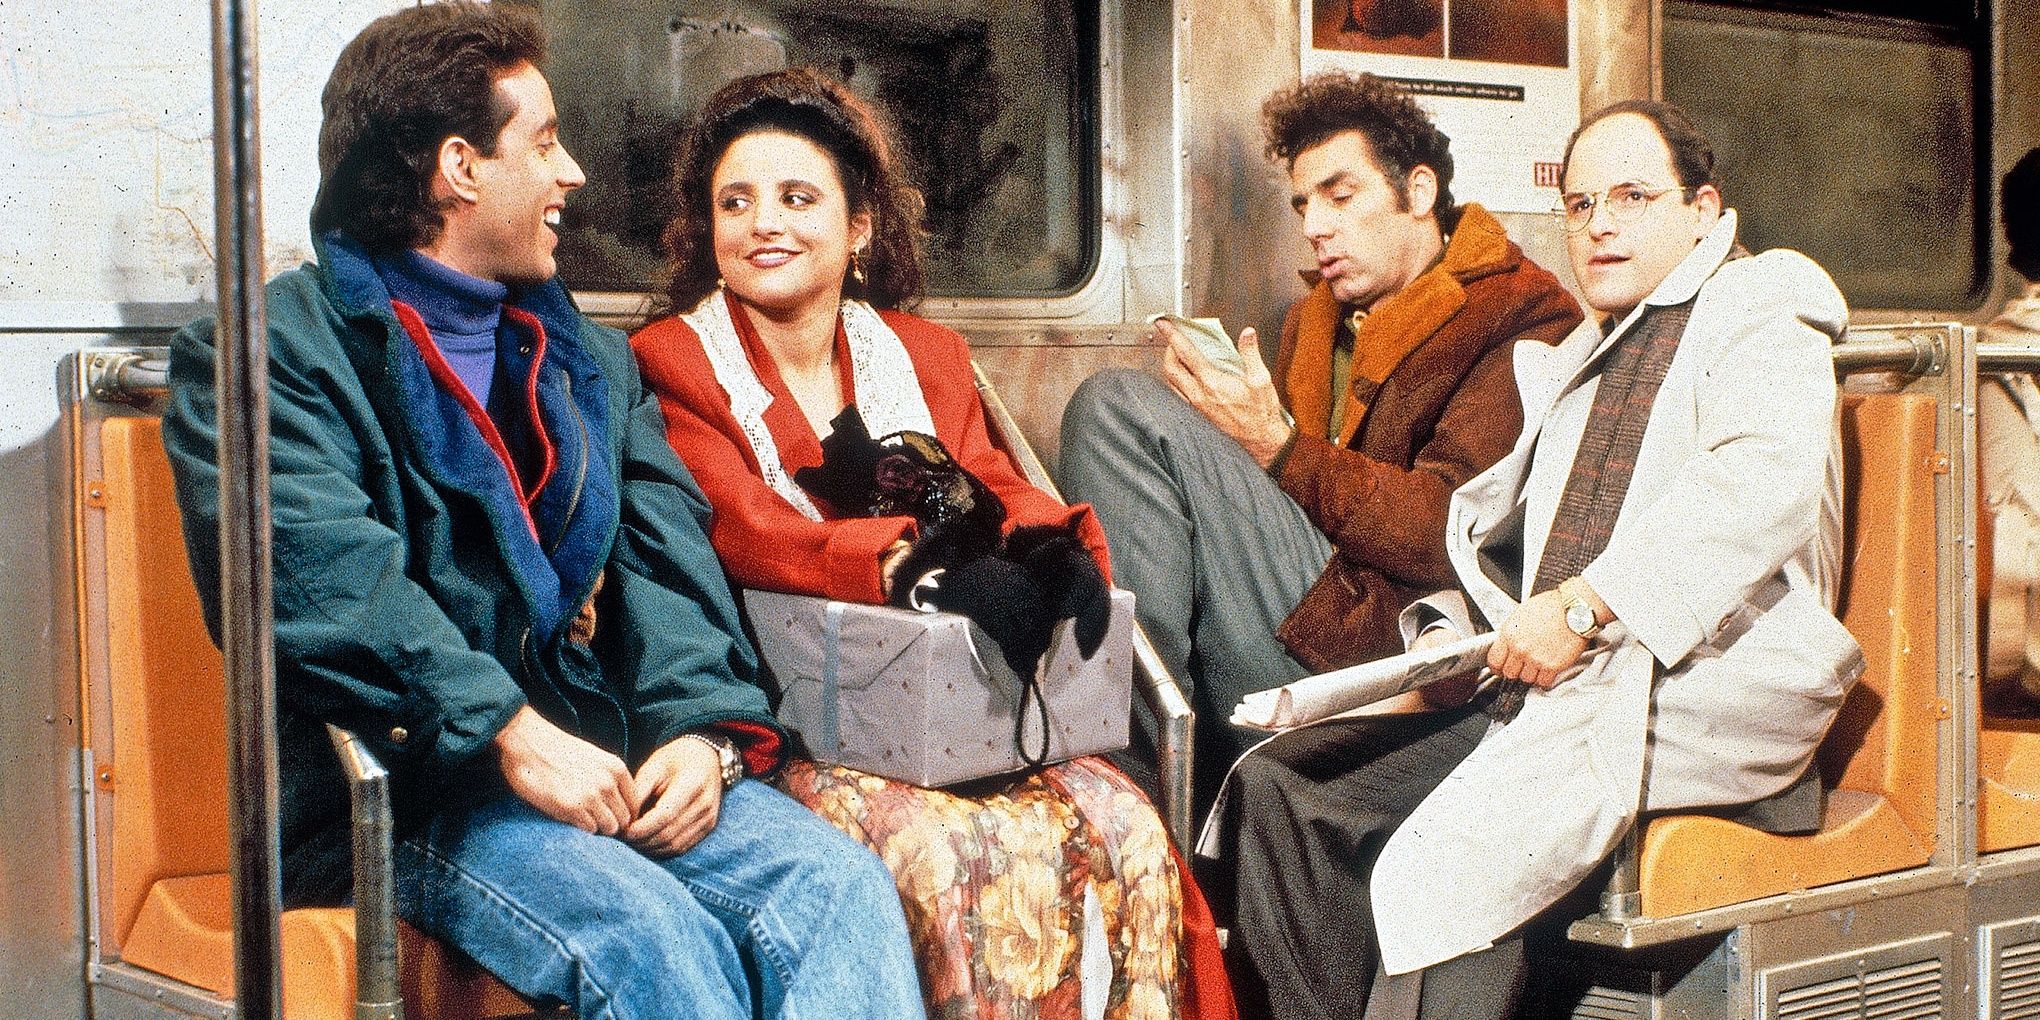 Gang sitting together in a subway carriage on Seinfeld.